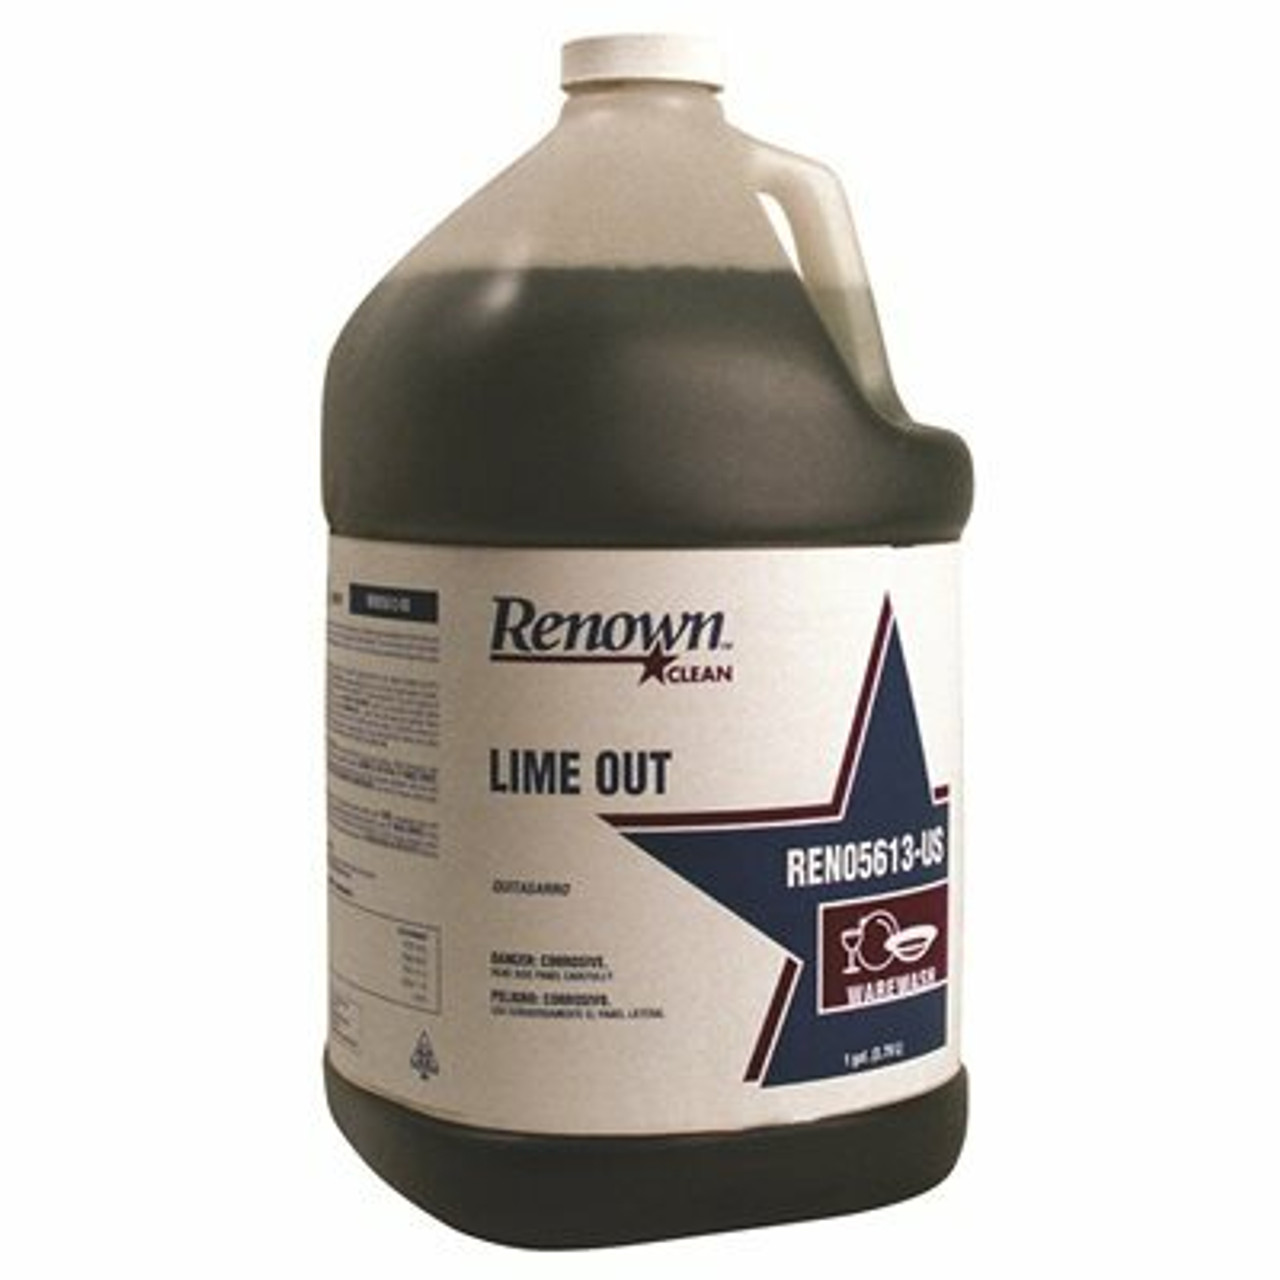 Renown 1 Gal. Lime Out Institutional Strength Acid For The Removal Of Lime And Mineral Soil (4-Pack)